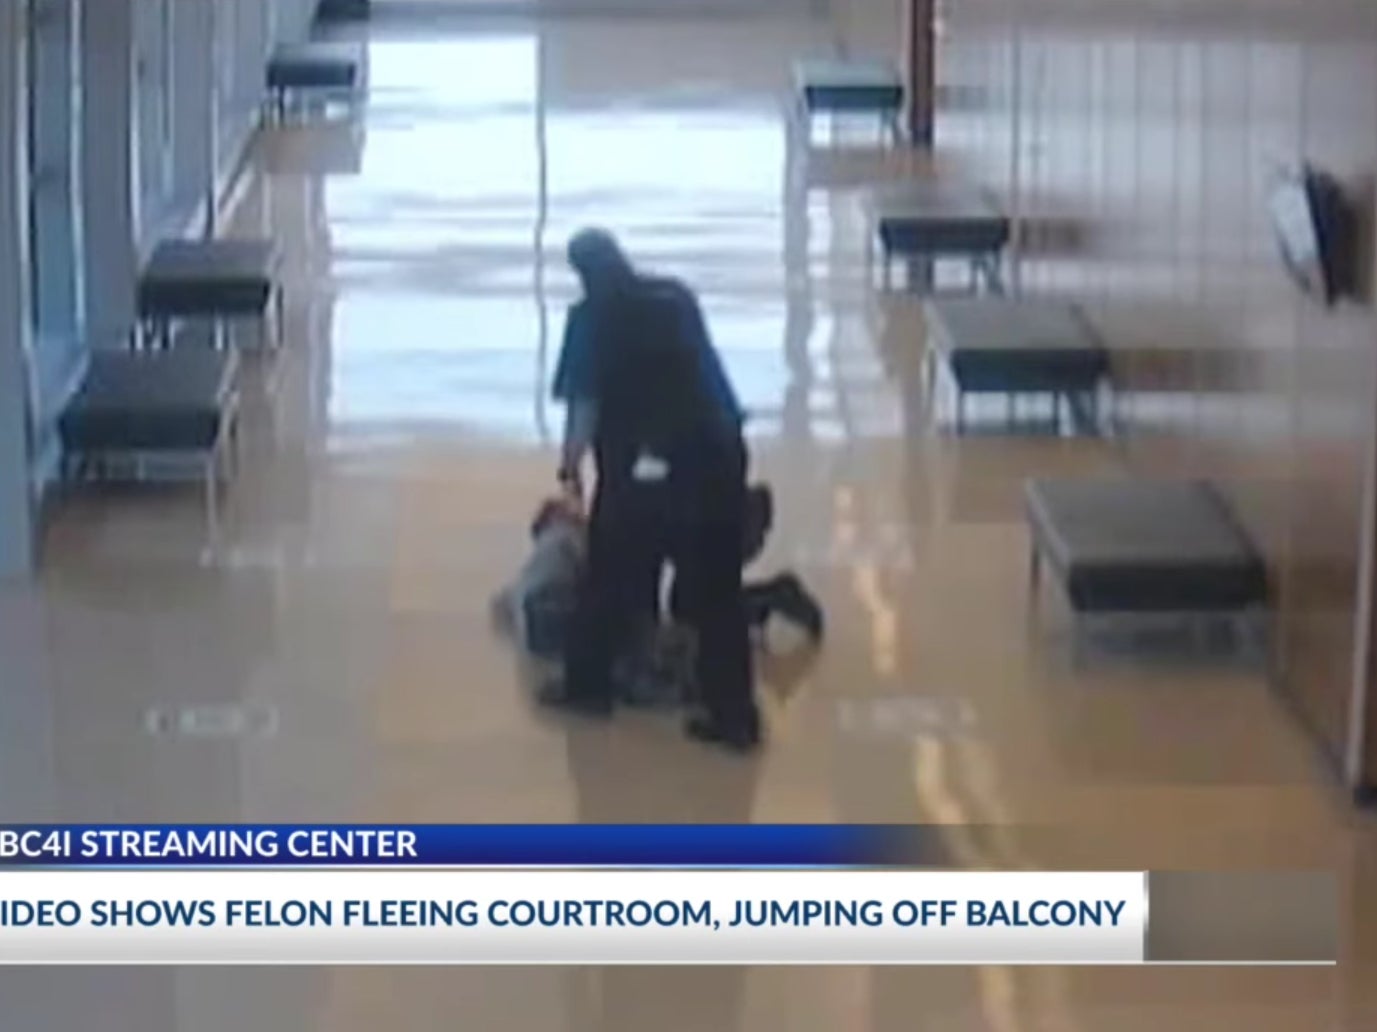 Video showing a felon jump off a balcony during a sentencing hearing